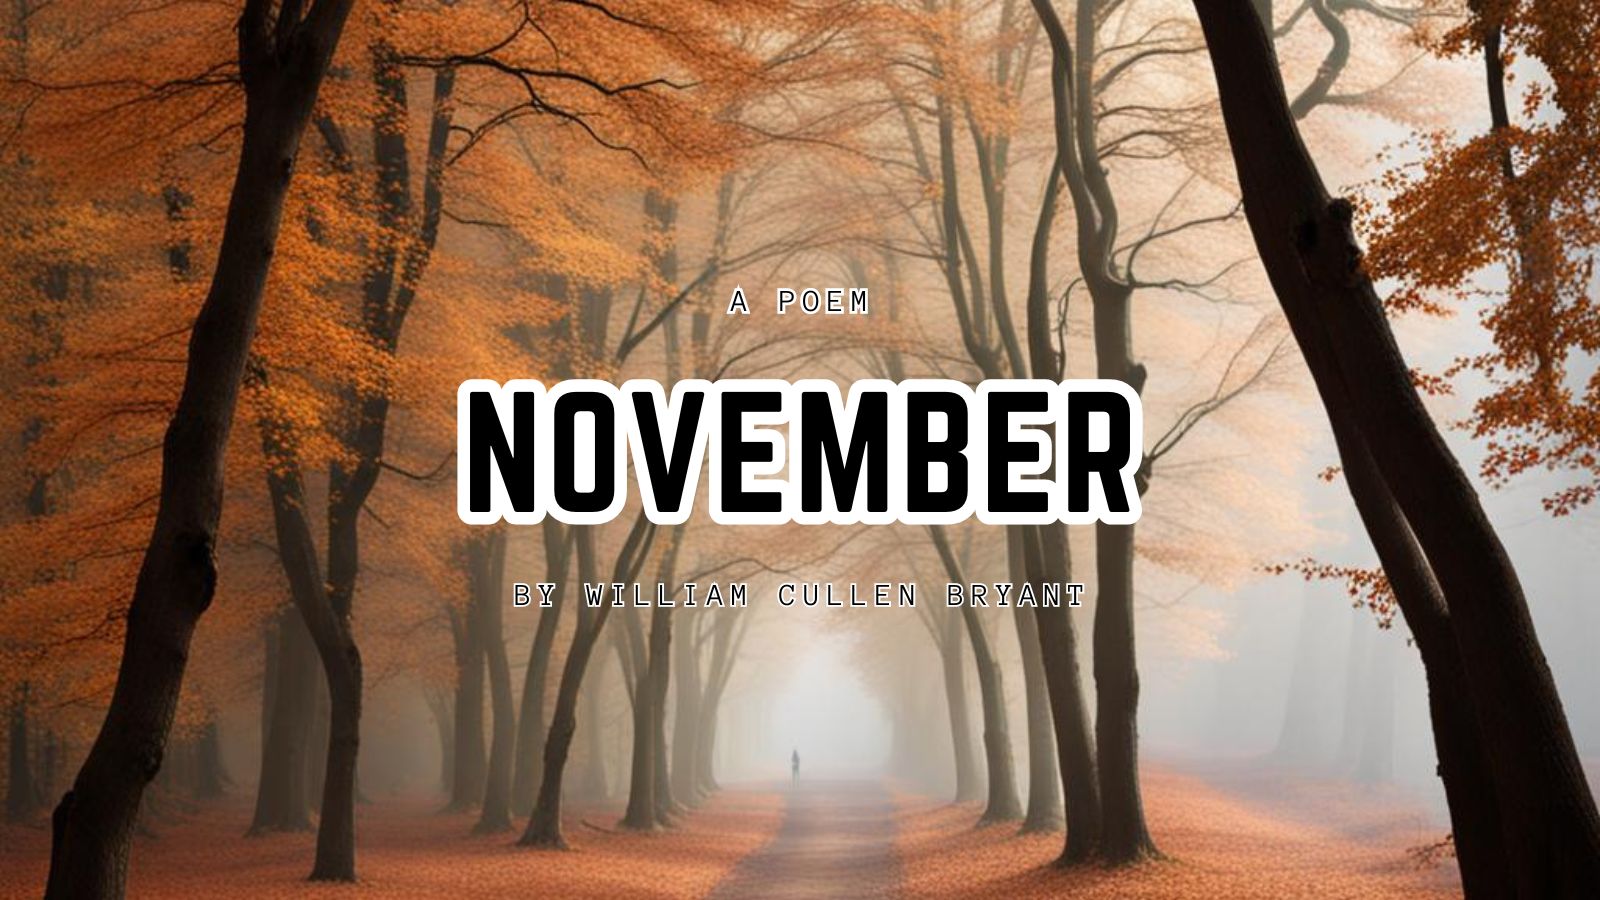 NOVEMBER (A SONNET) by William Cullen Bryant